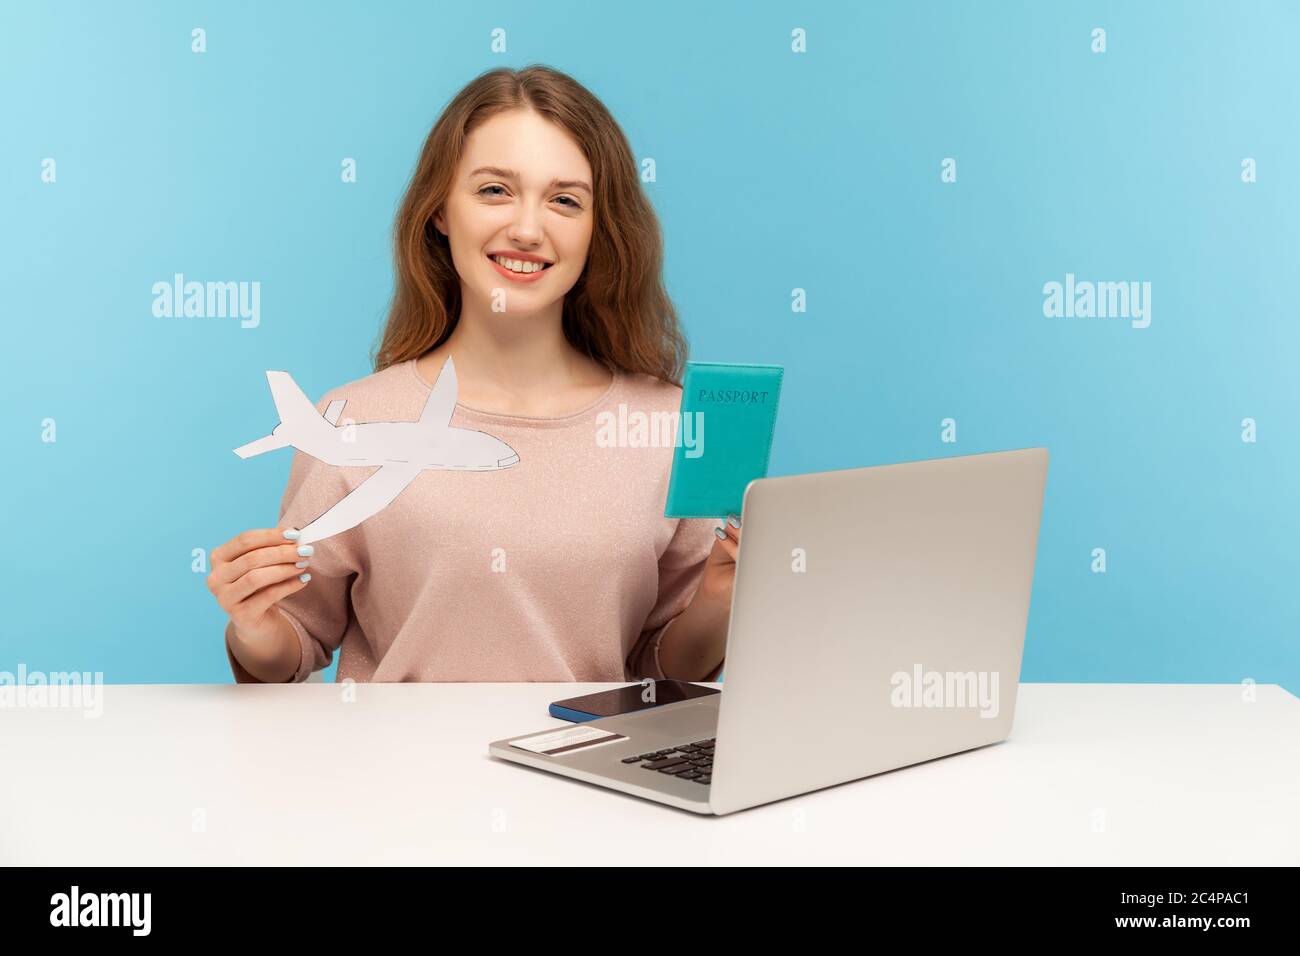 Friendly woman, travel agent holding passport and paper airplane, looking at camera with toothy smile, advertising hot tours with airline transportati Stock Photo